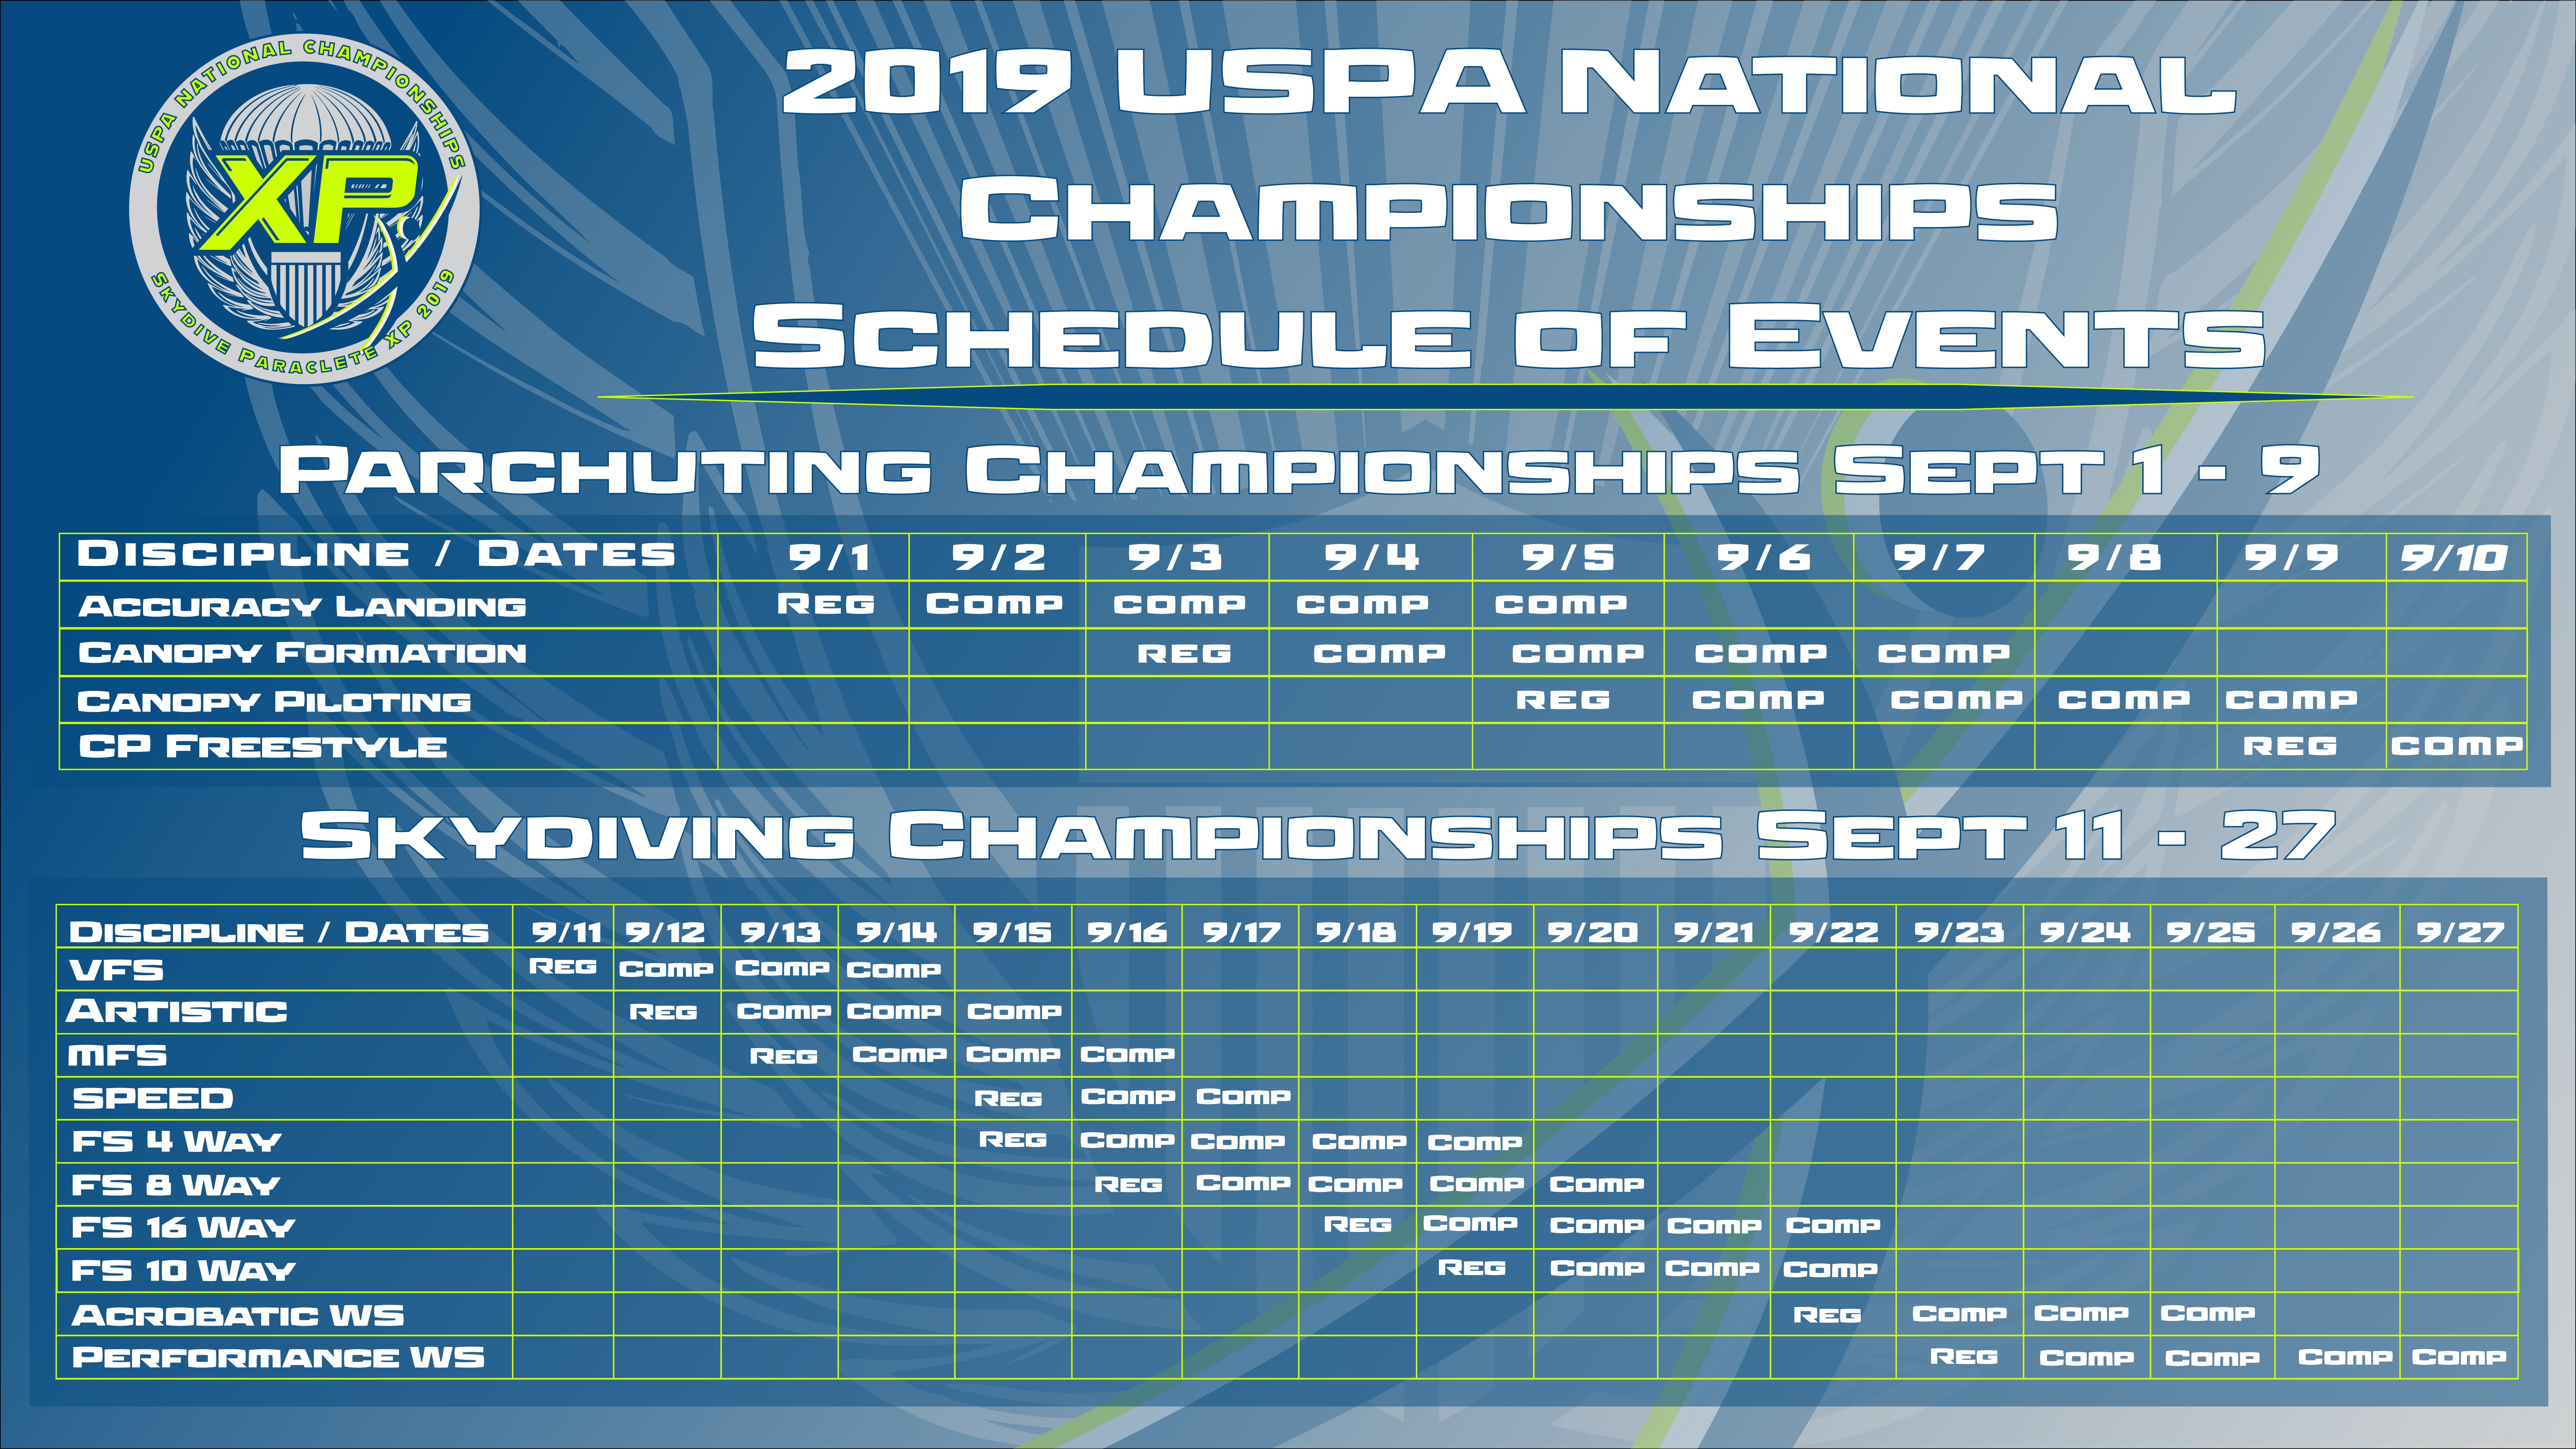 2019 USPA National Championships Schedule of Events